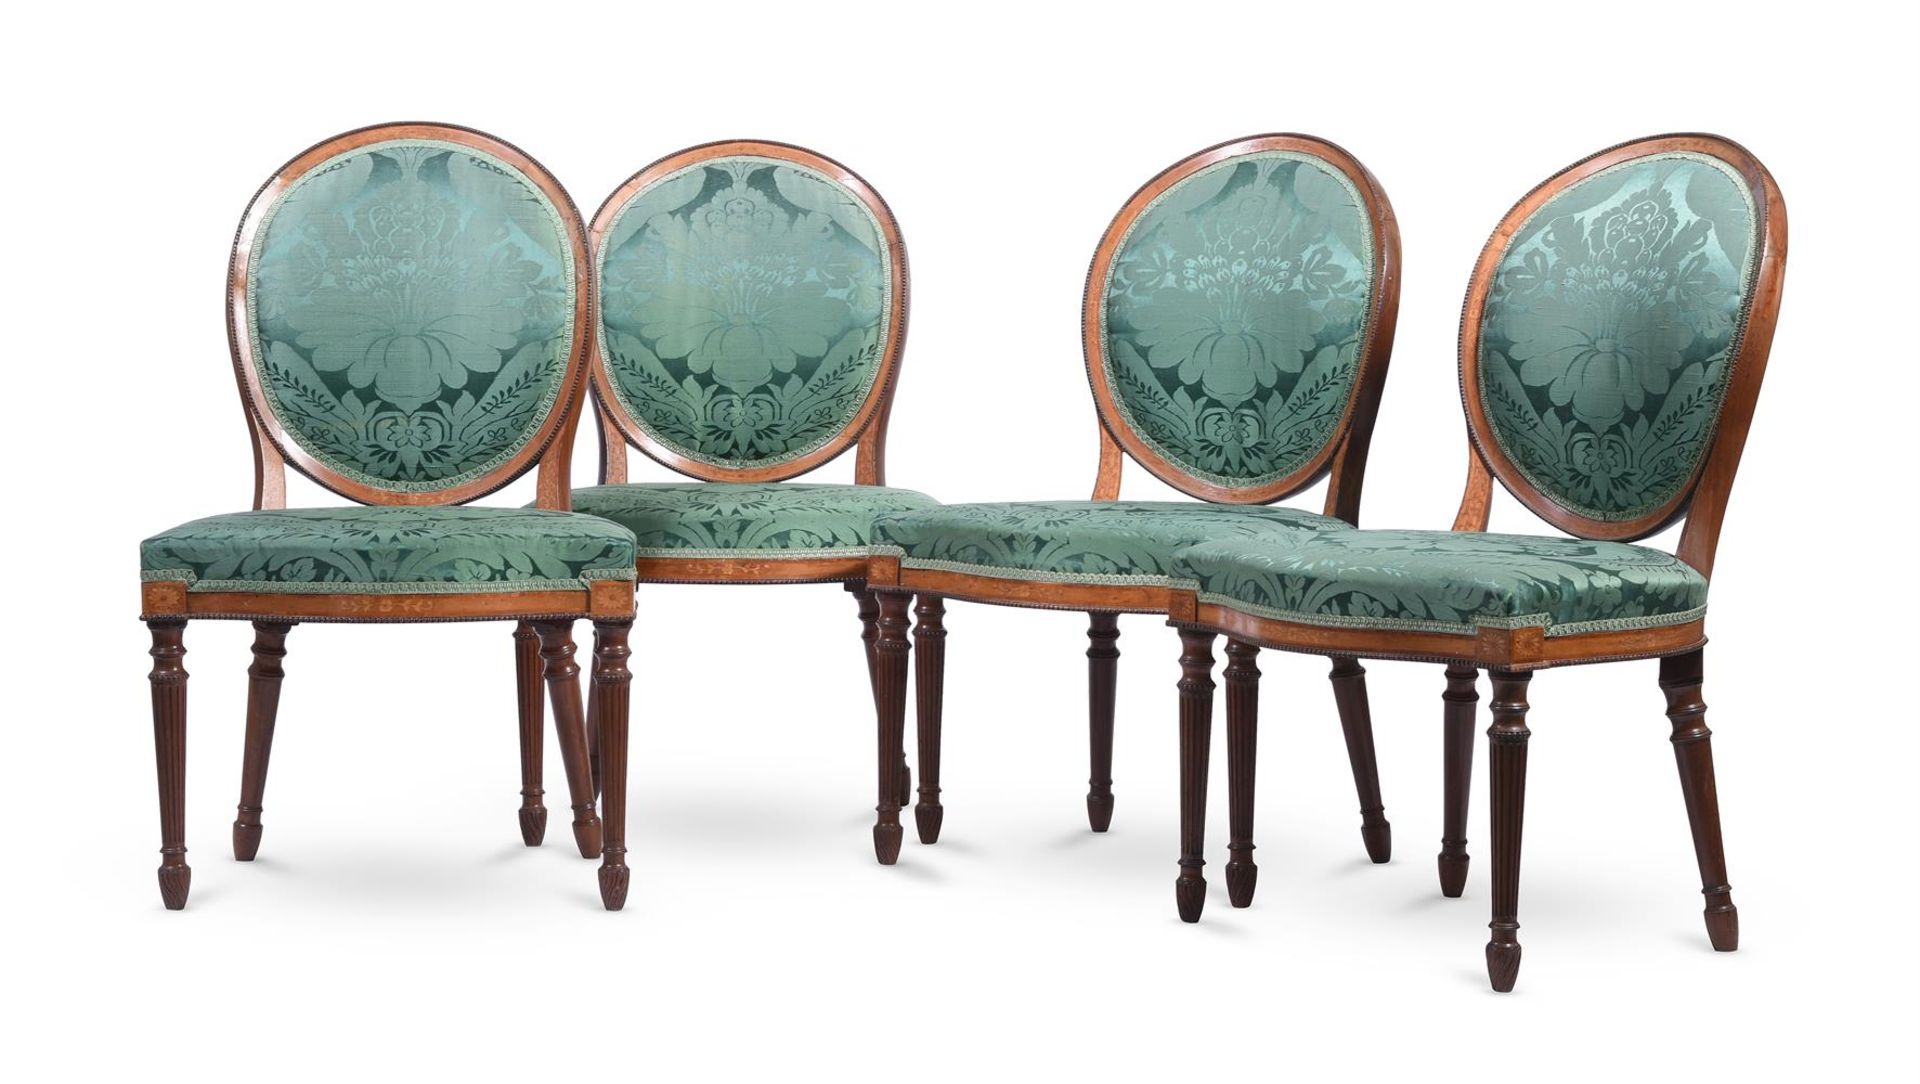 A SET OF EIGHT GEORGE III CHAIRS IN THE MANNER OF JOHN LINNELL, CIRCA 1780 - Image 6 of 6